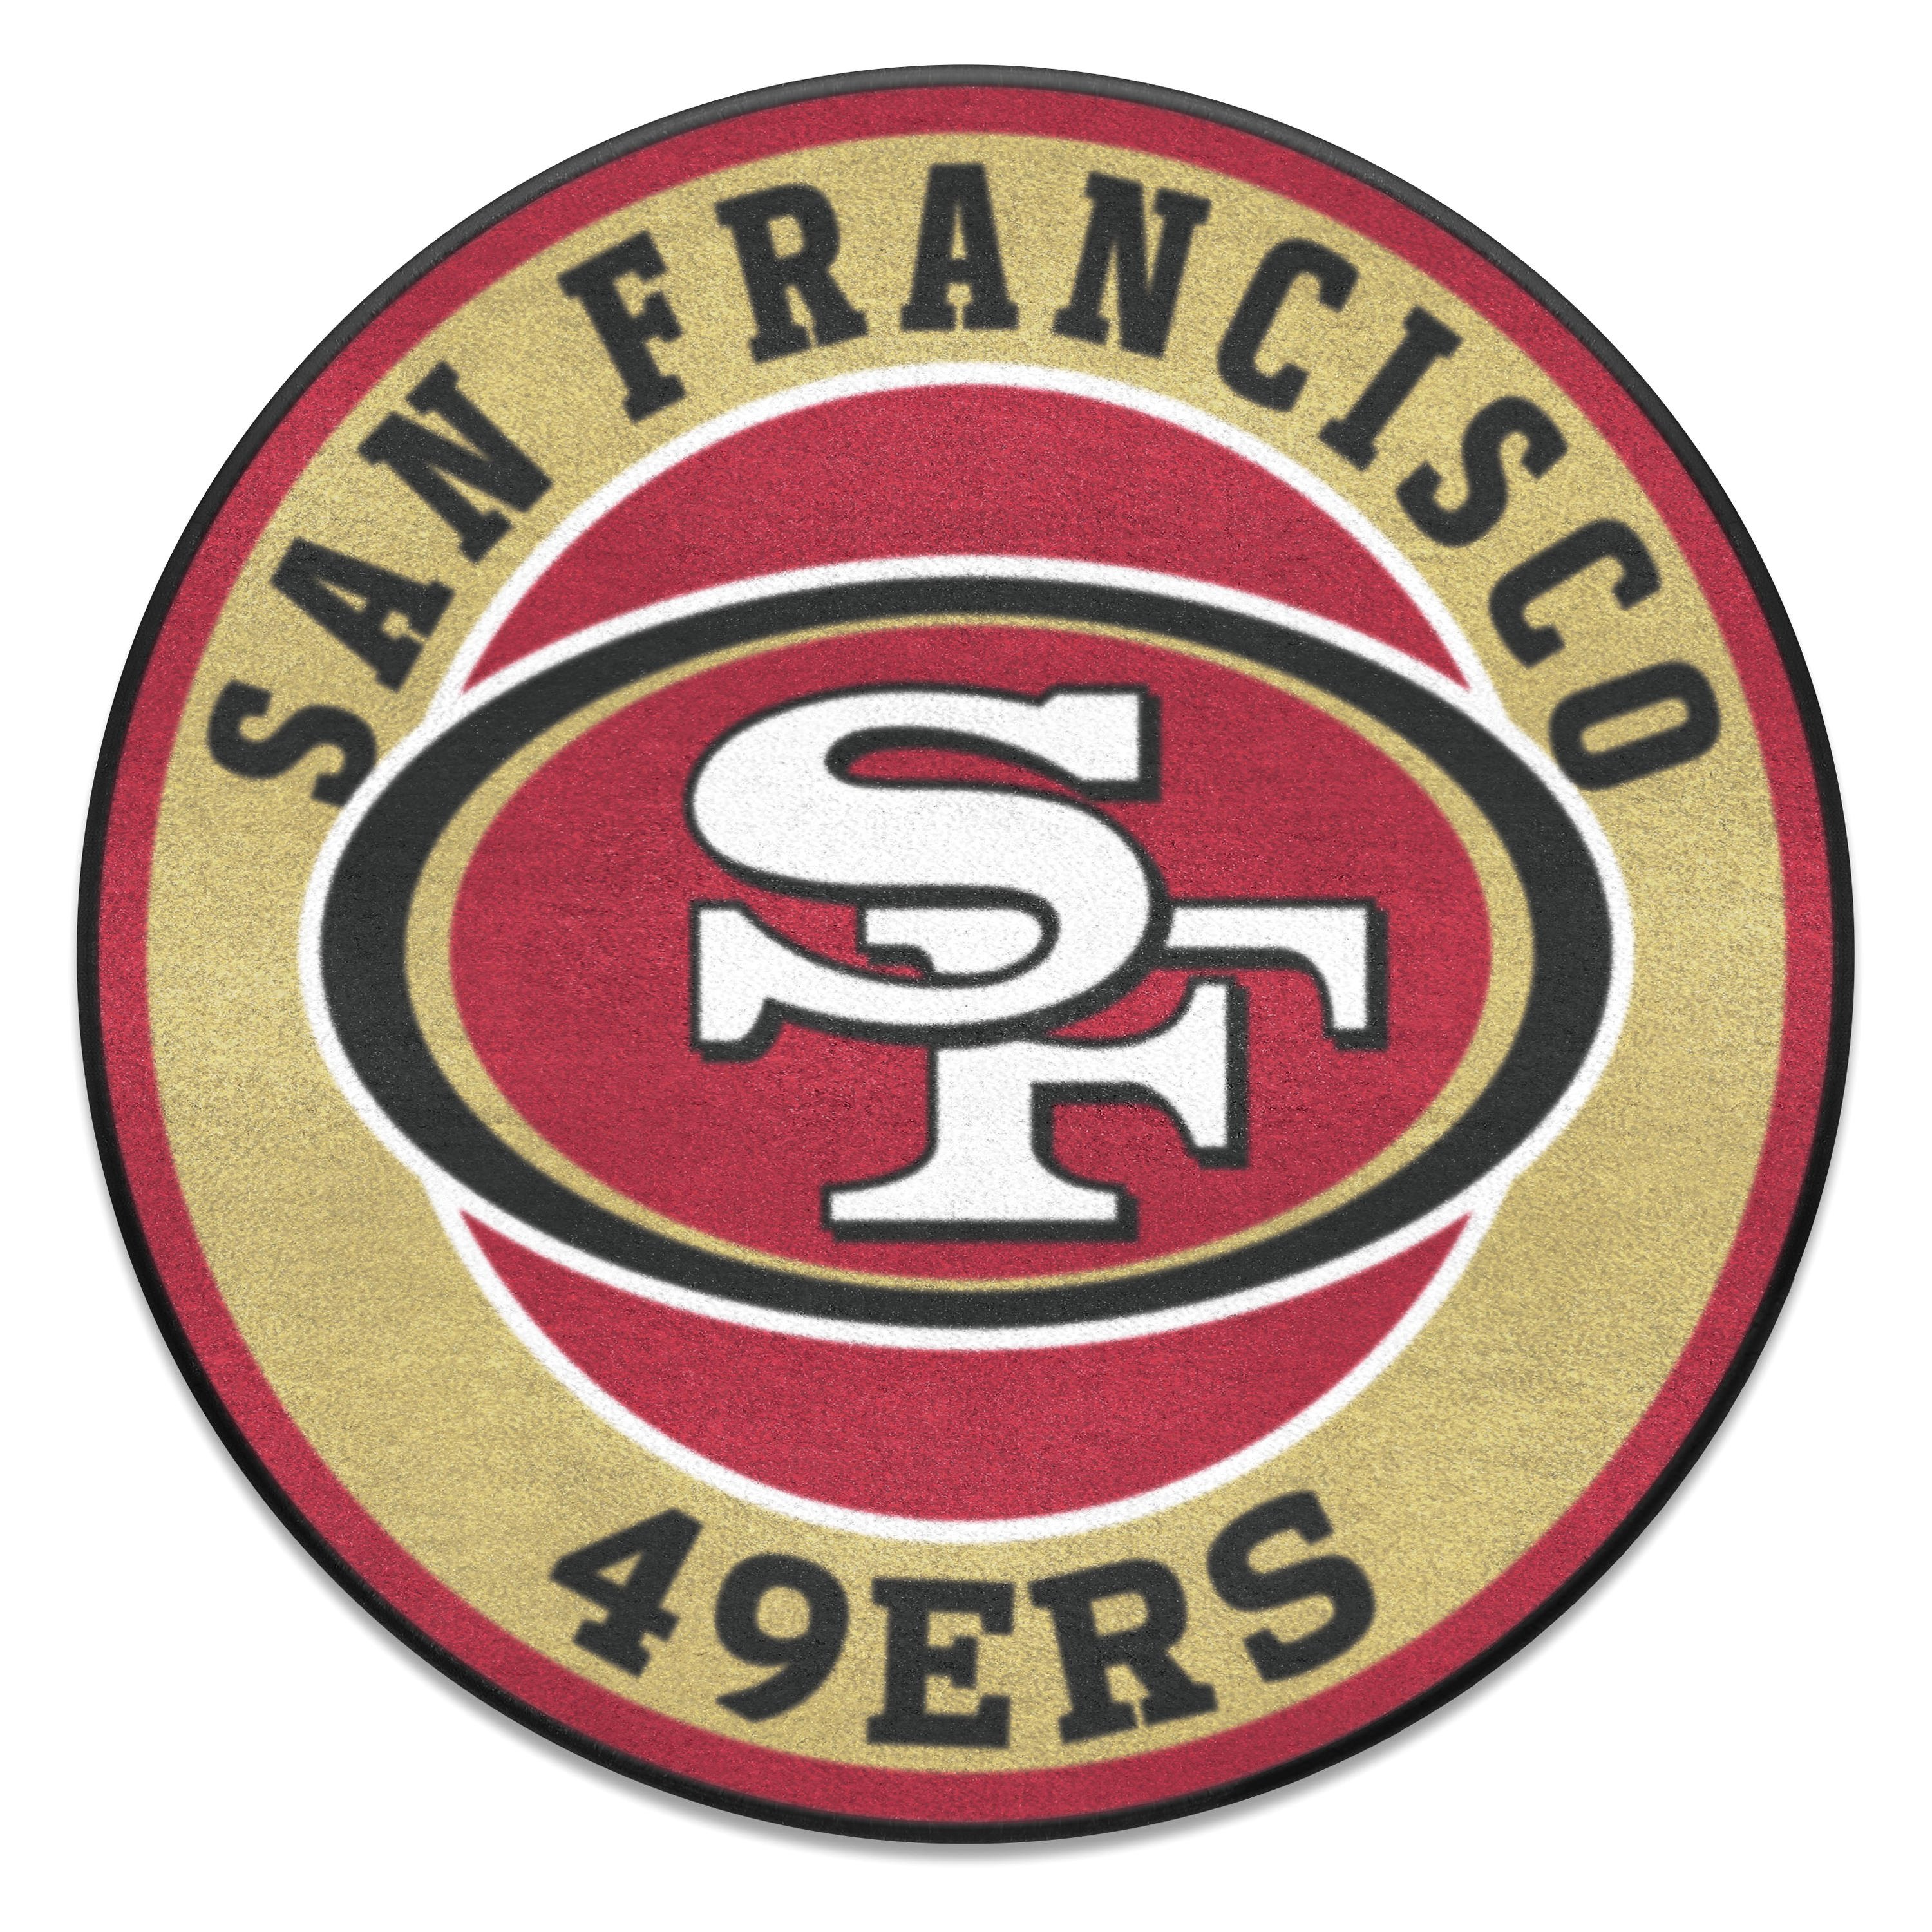 what is the 49ers logo